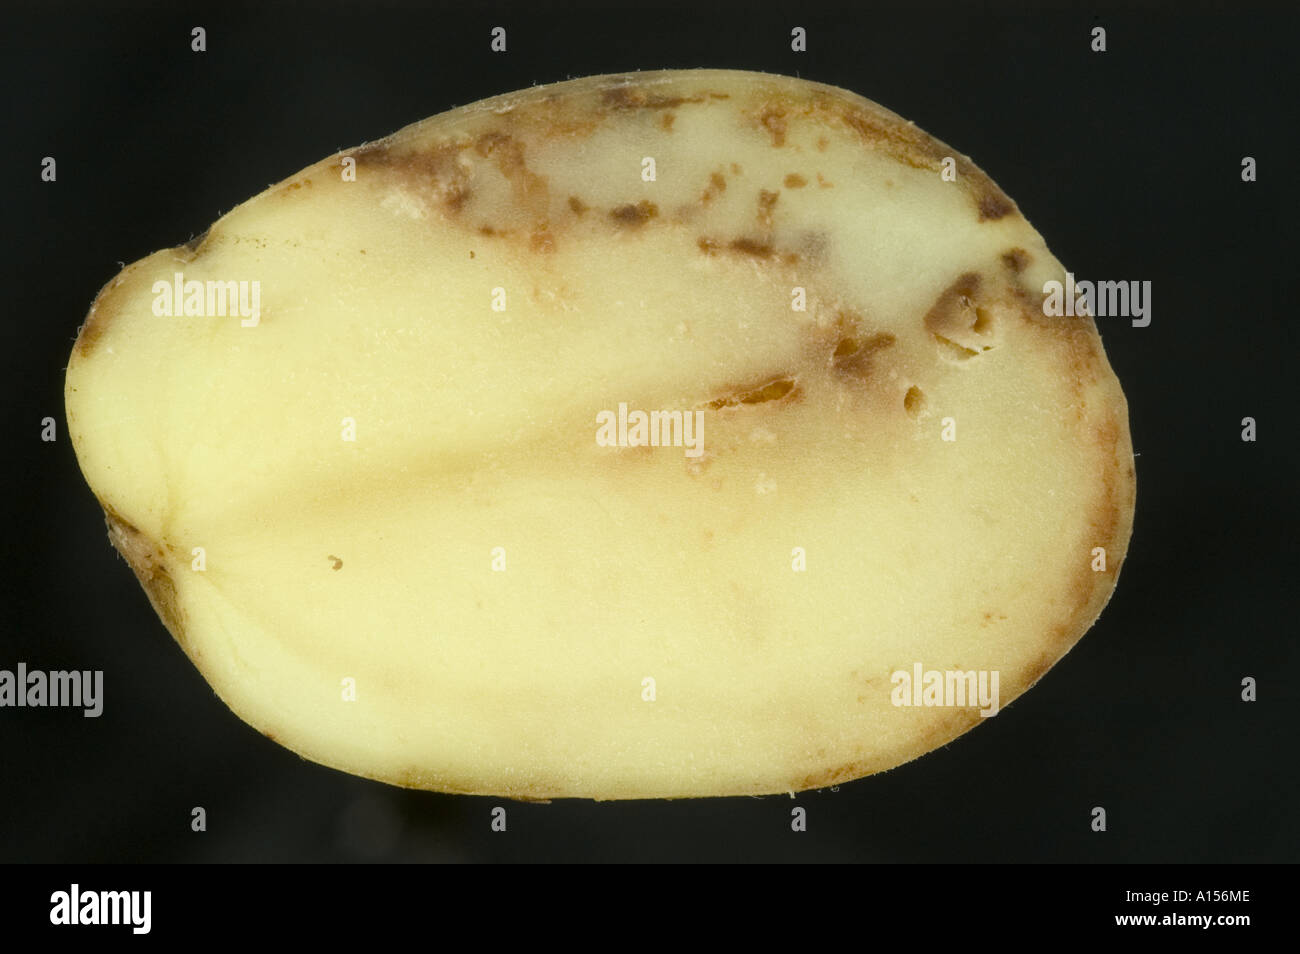 Flesh discolouration caused by late blight Phytophthora infestans in potato tuber section Stock Photo